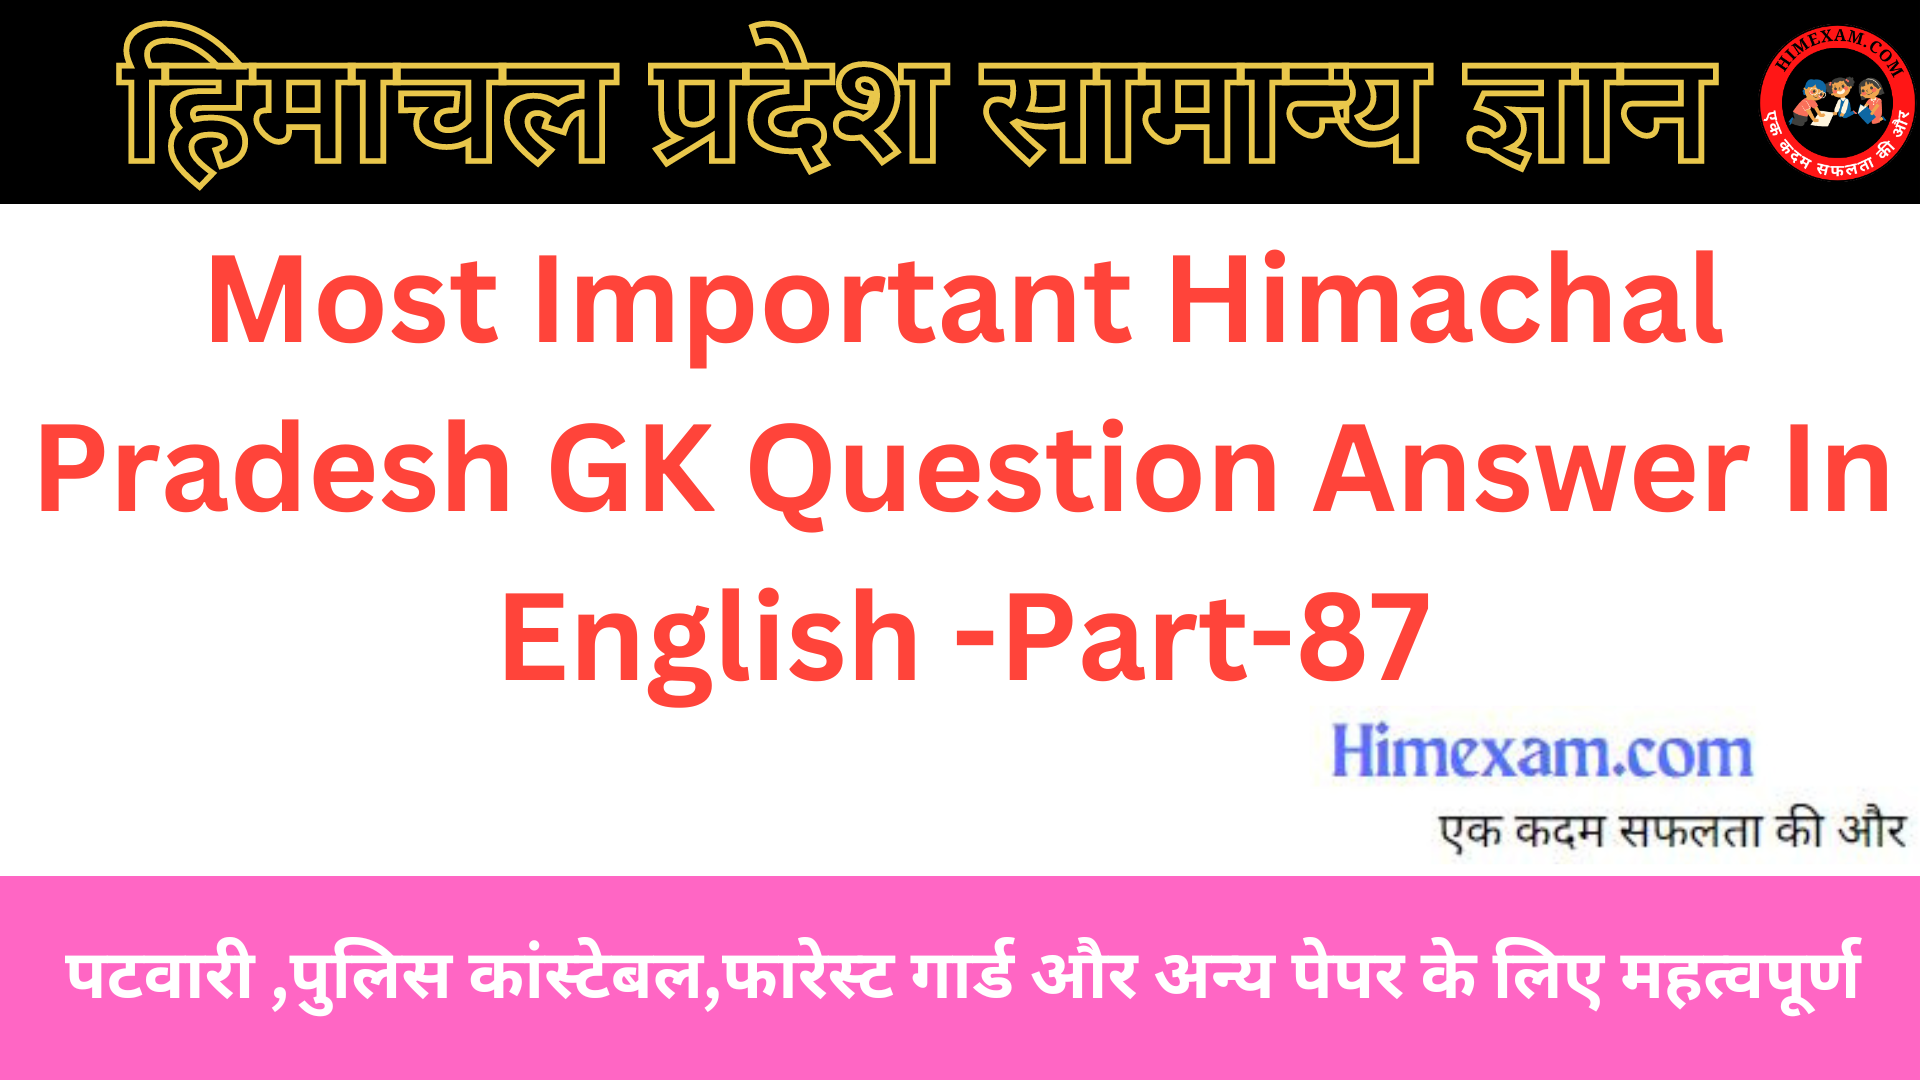 Most Important Himachal Pradesh GK Question Answer In English -Part-87